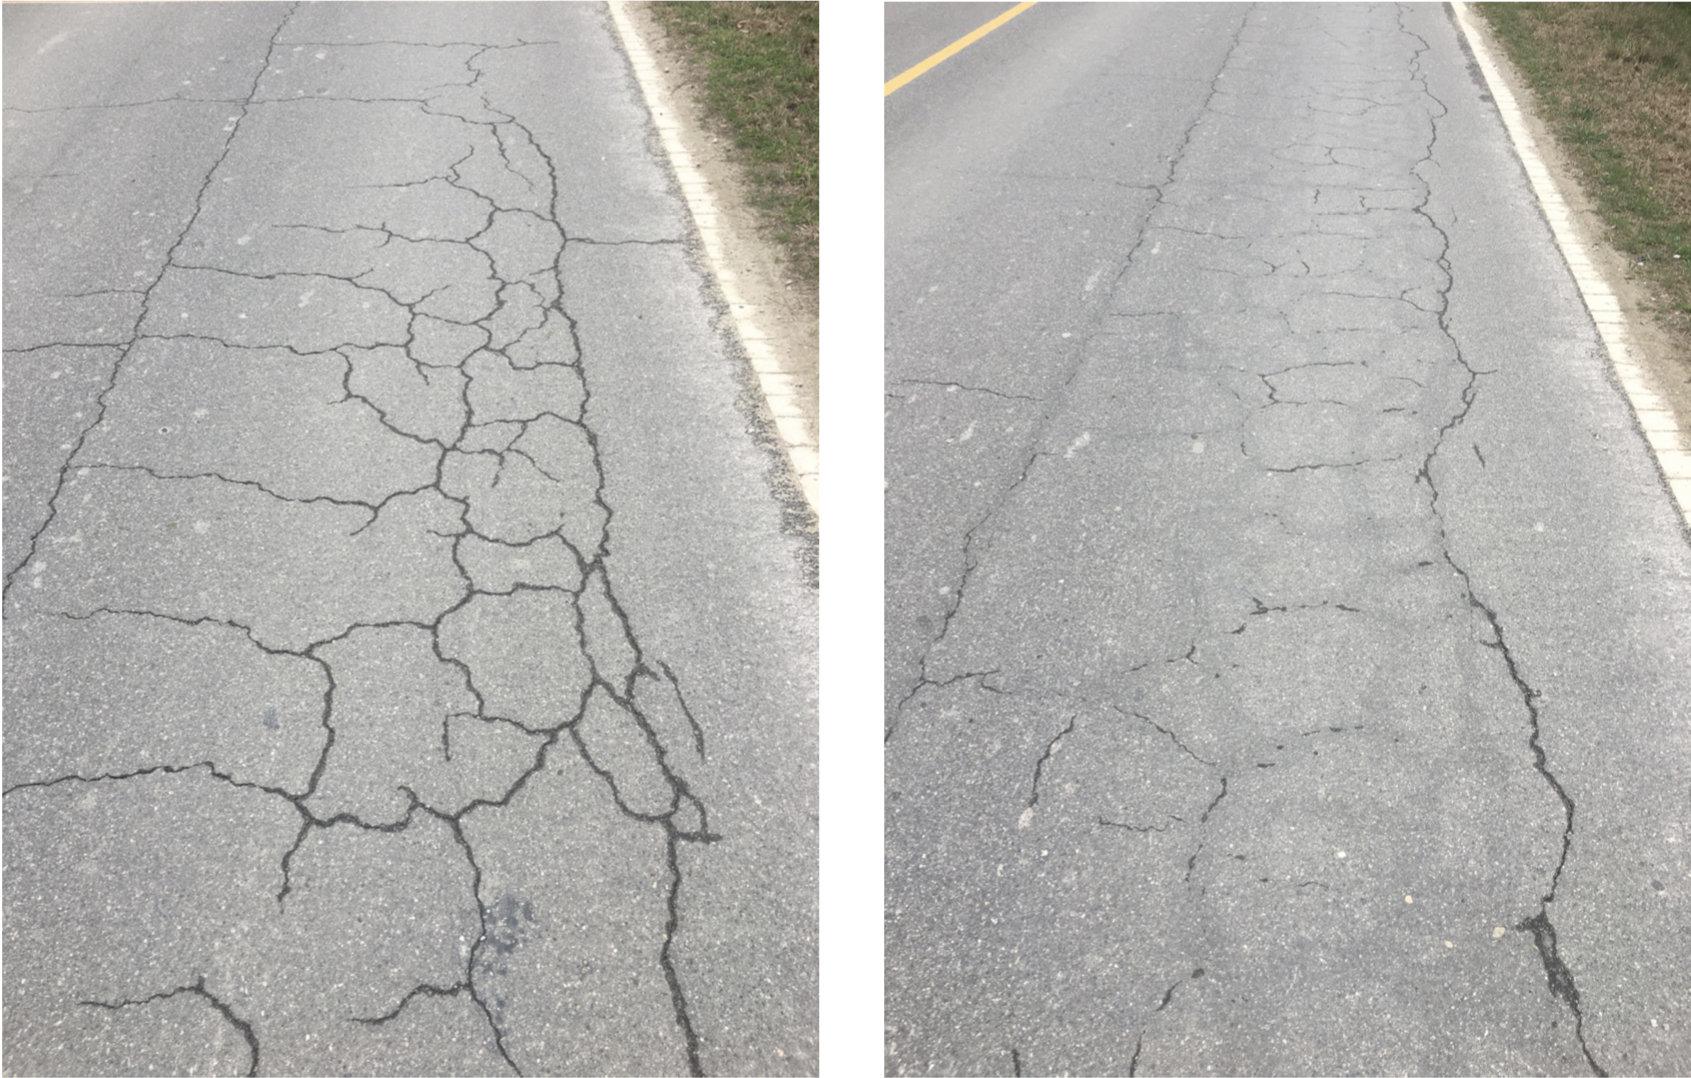 Figure 2. Micro surfacing sections: stand-alone (left) and with crack sealing (right).